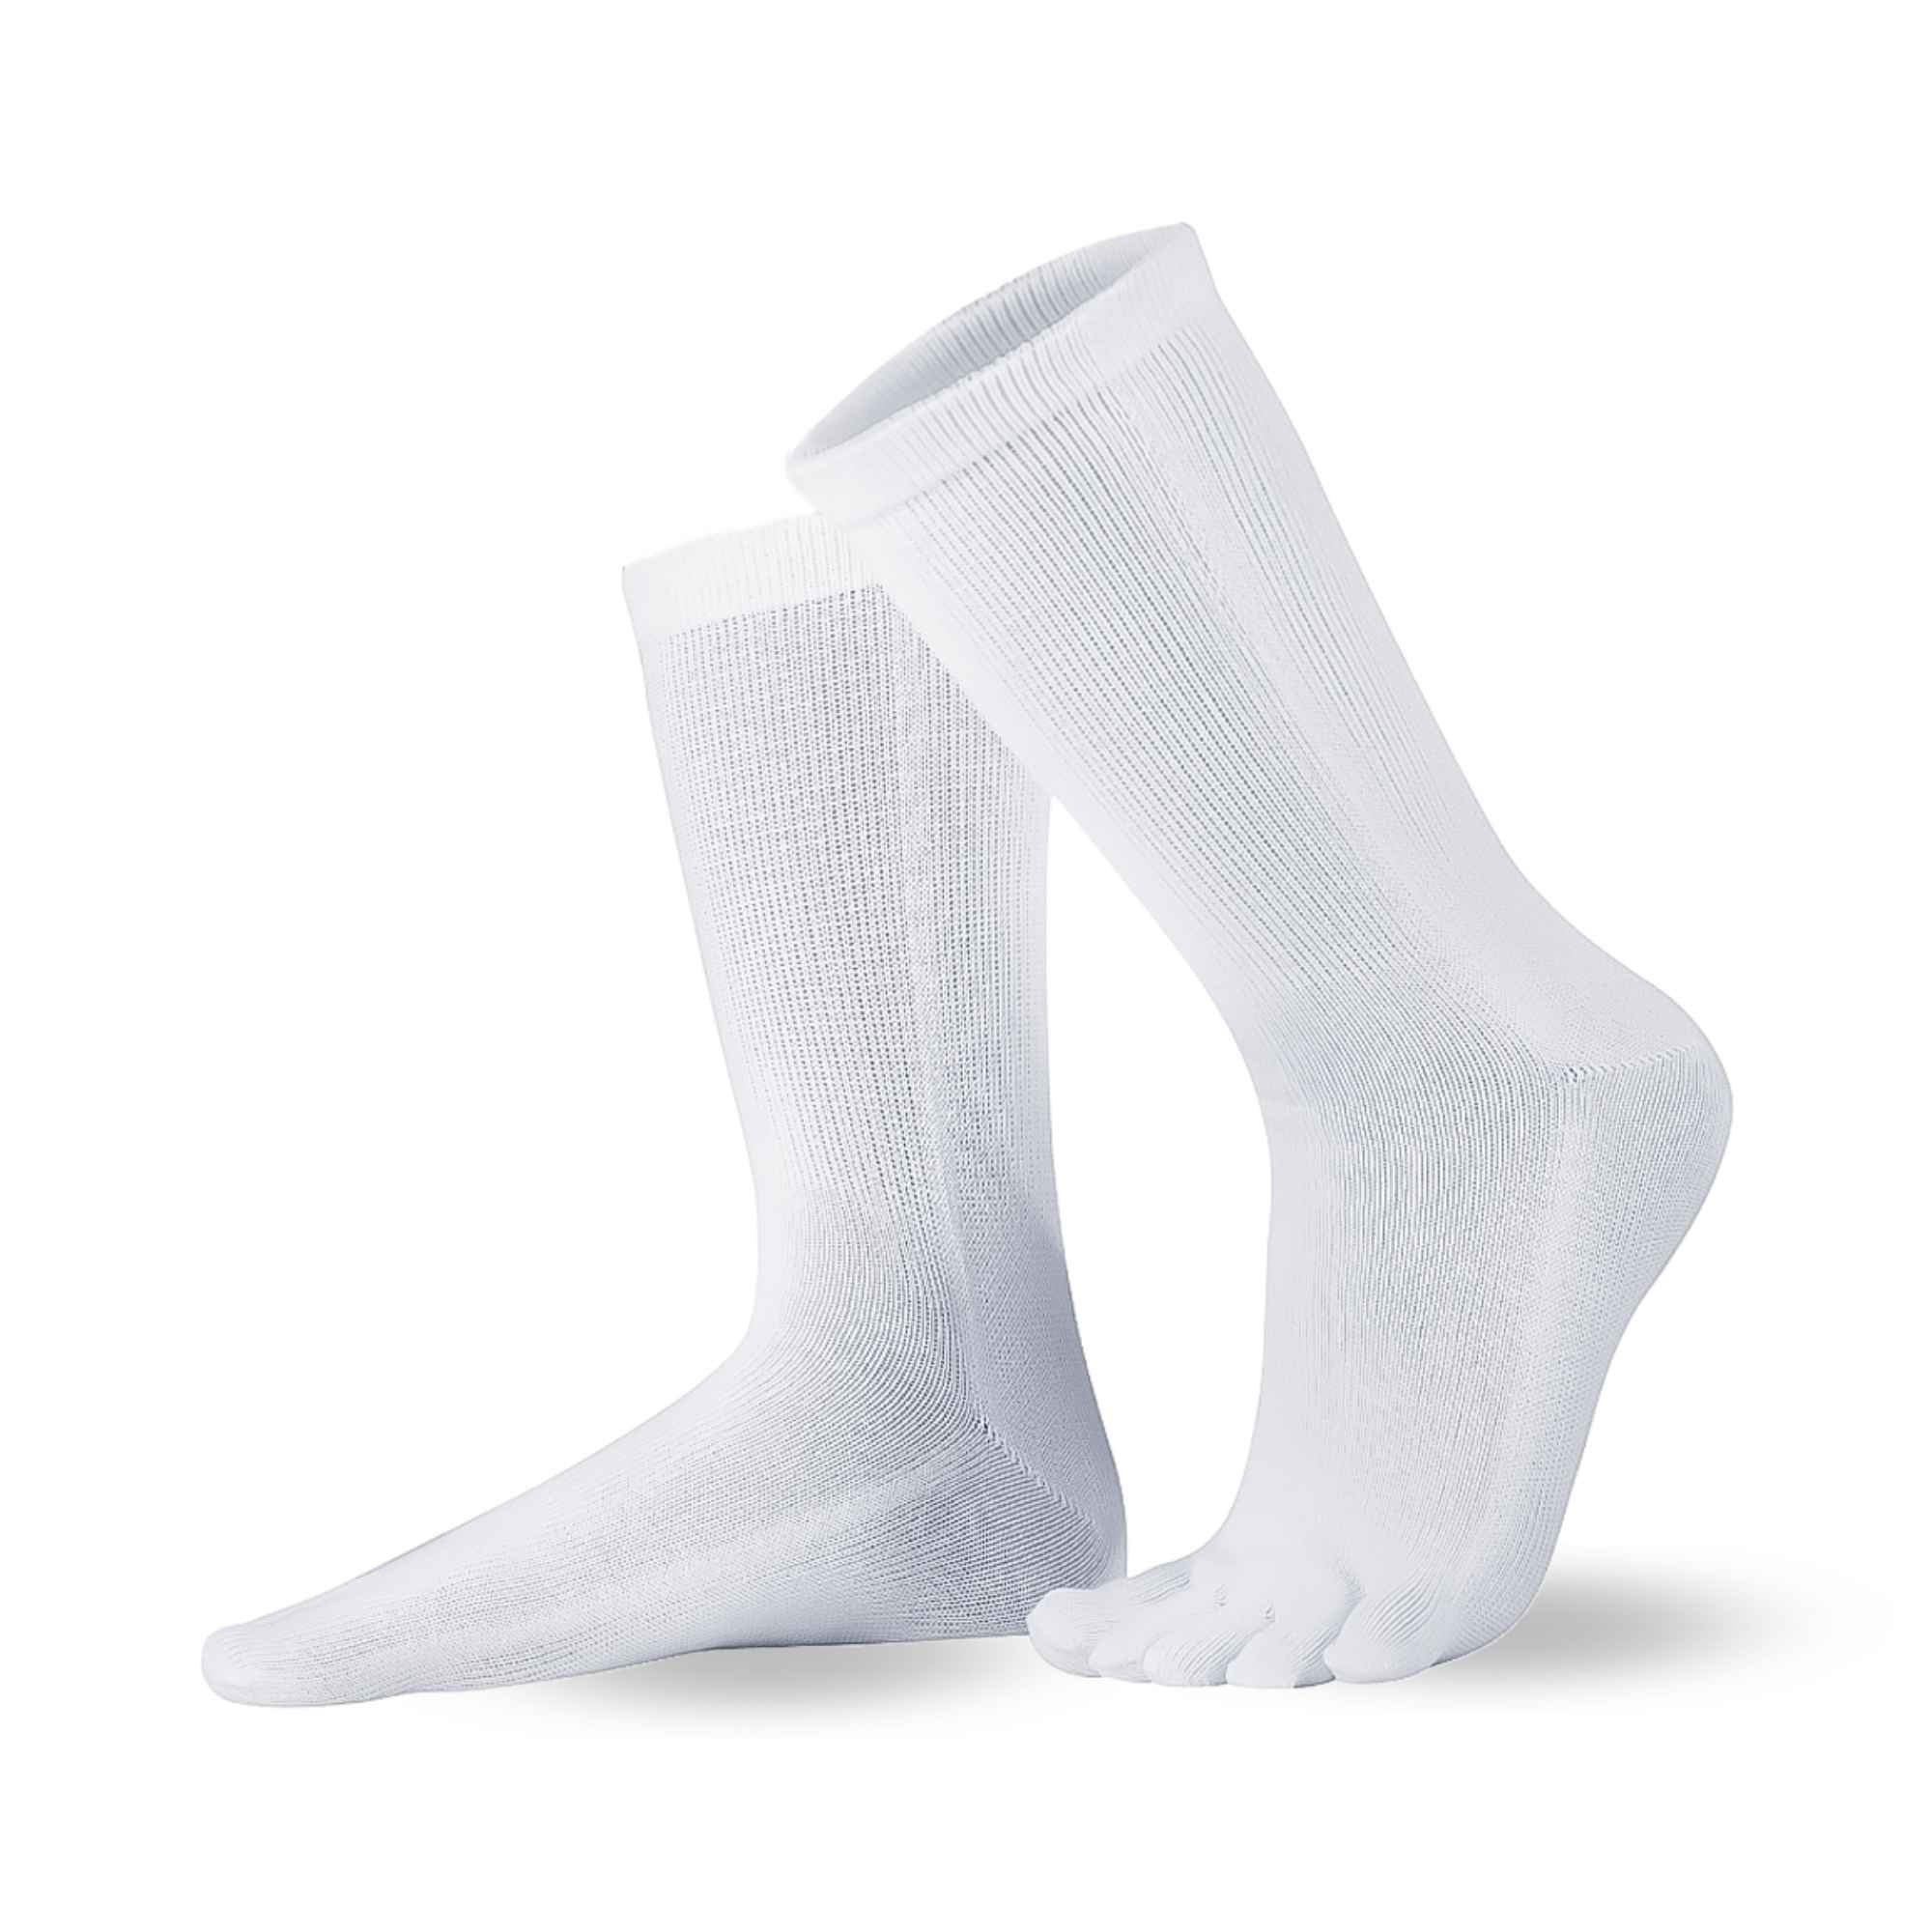 Knitido Essentials toe socks from cotton in white